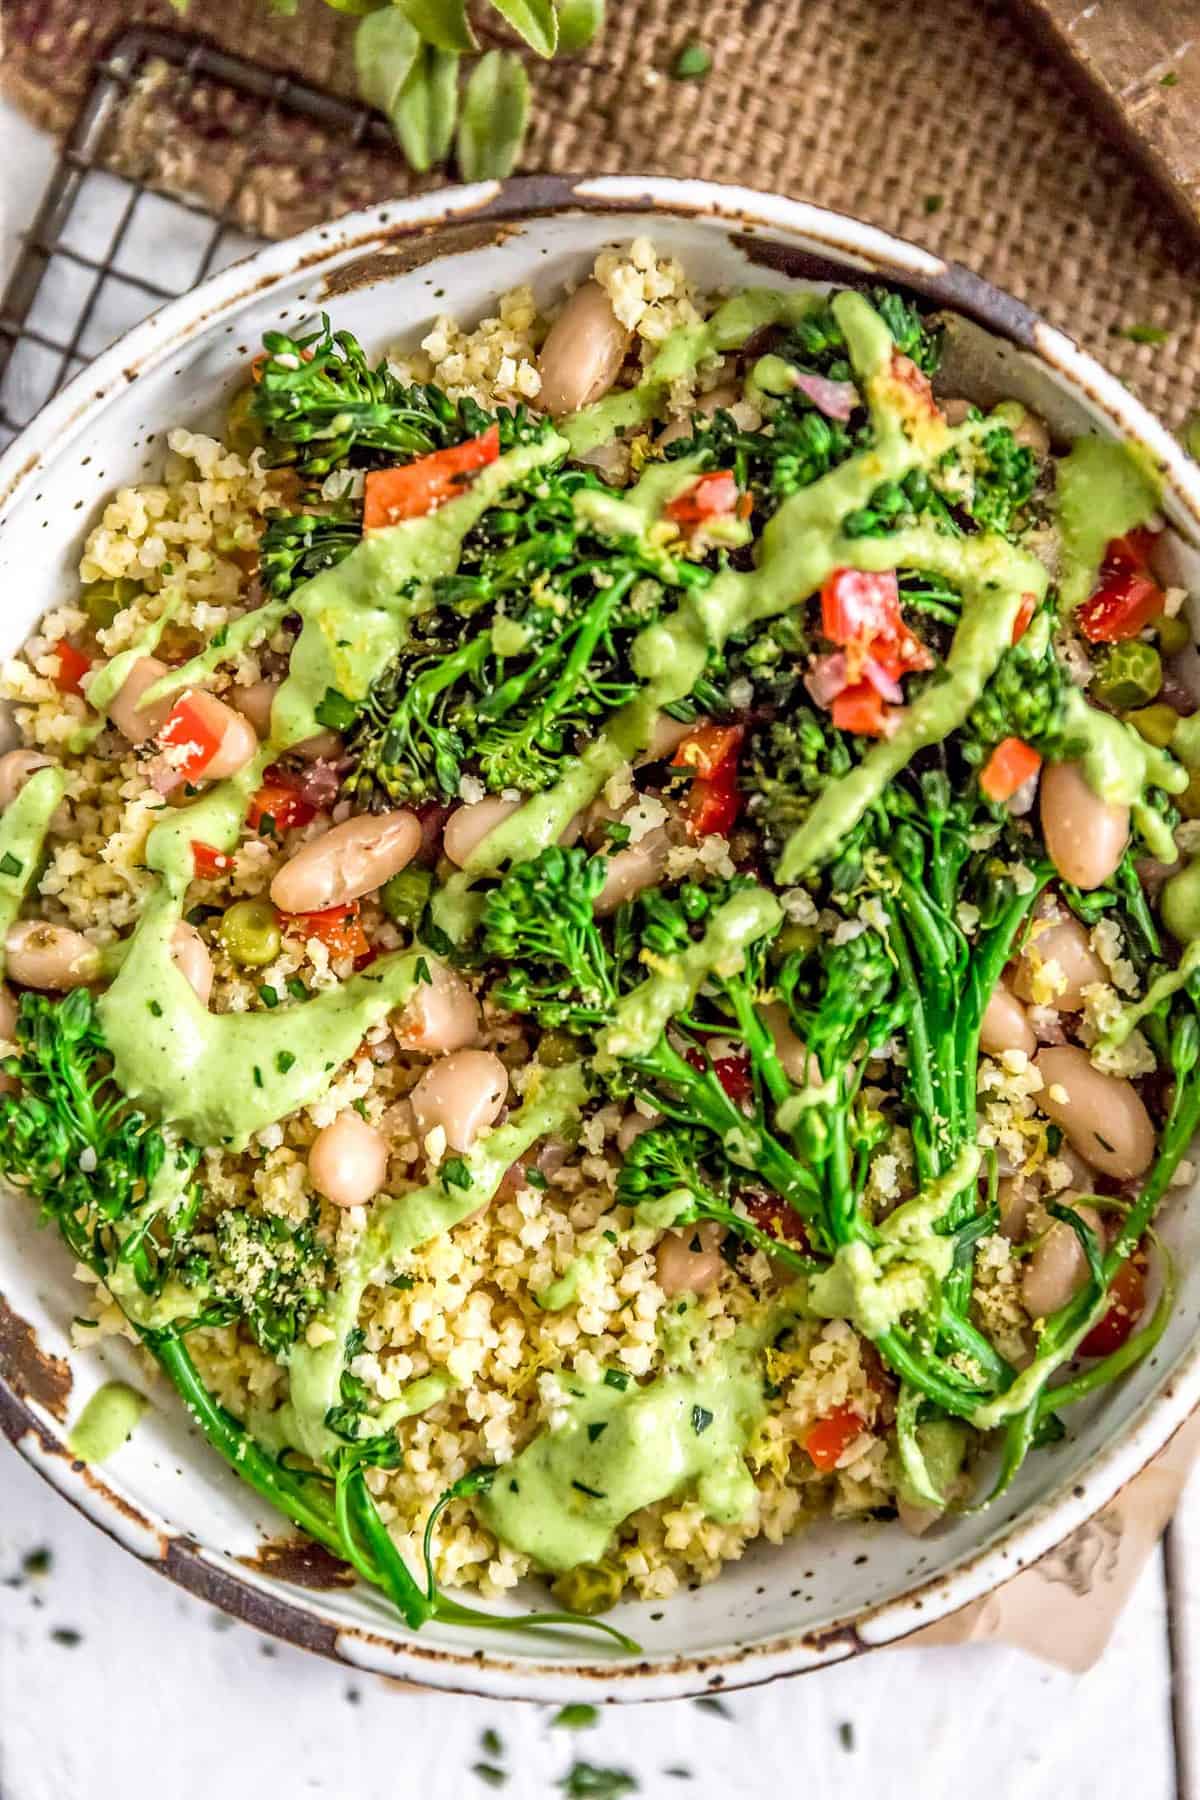 Italian Broccolini Millet Bowl drizzled with Lemony Parsley Sauce